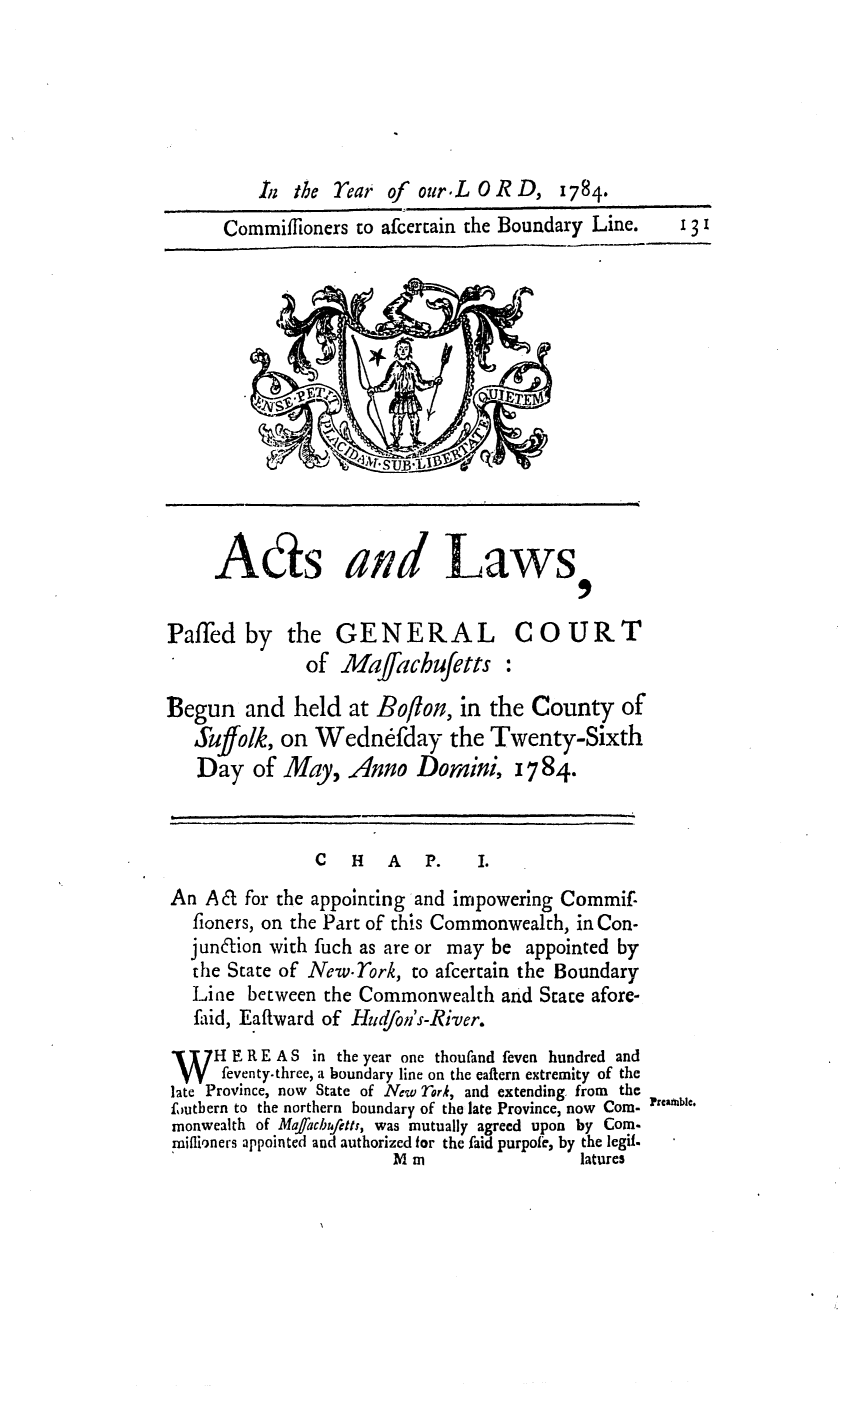 handle is hein.ssl/ssma0266 and id is 1 raw text is: iz the rear of our.L OR D,

Commiffioners to afcercain the Boundary Line.

Ads and Laws

Pafled by the
of

GENERAL COURT
Maffachufetts

Begun and held at Boflon, in the County of
Suffolk, on Wednefday the Twenty-Sixth
Day of May, Anno Dornini, 1784.

C  H  A  P.

An Ad for the appointing and impowering Commif.
fioners, on the Part of this Commonwealth, in Con-
jundion with fuch as are or may be appointed by
the State of New.York, to afcertain the Boundary
Line between the Commonwealth and State afore-
faid, Eaftward of Hudfon's-River.
WH E R E A S in the year one thoufand feven hundred and
W     feventy.three, a boundary line on the eaftern extremity of the
late Province, now State of New Thri, and extending from the
foutbern to the northern boundary of the late Province, now Corn- trble.
monwealth of Maffachtf etts, was mutually agreed upon by Com.
maiflioners appointed and authorized for the faid purpolc, by the legif.
M m                    latures

131

II
__ I I

1784.


